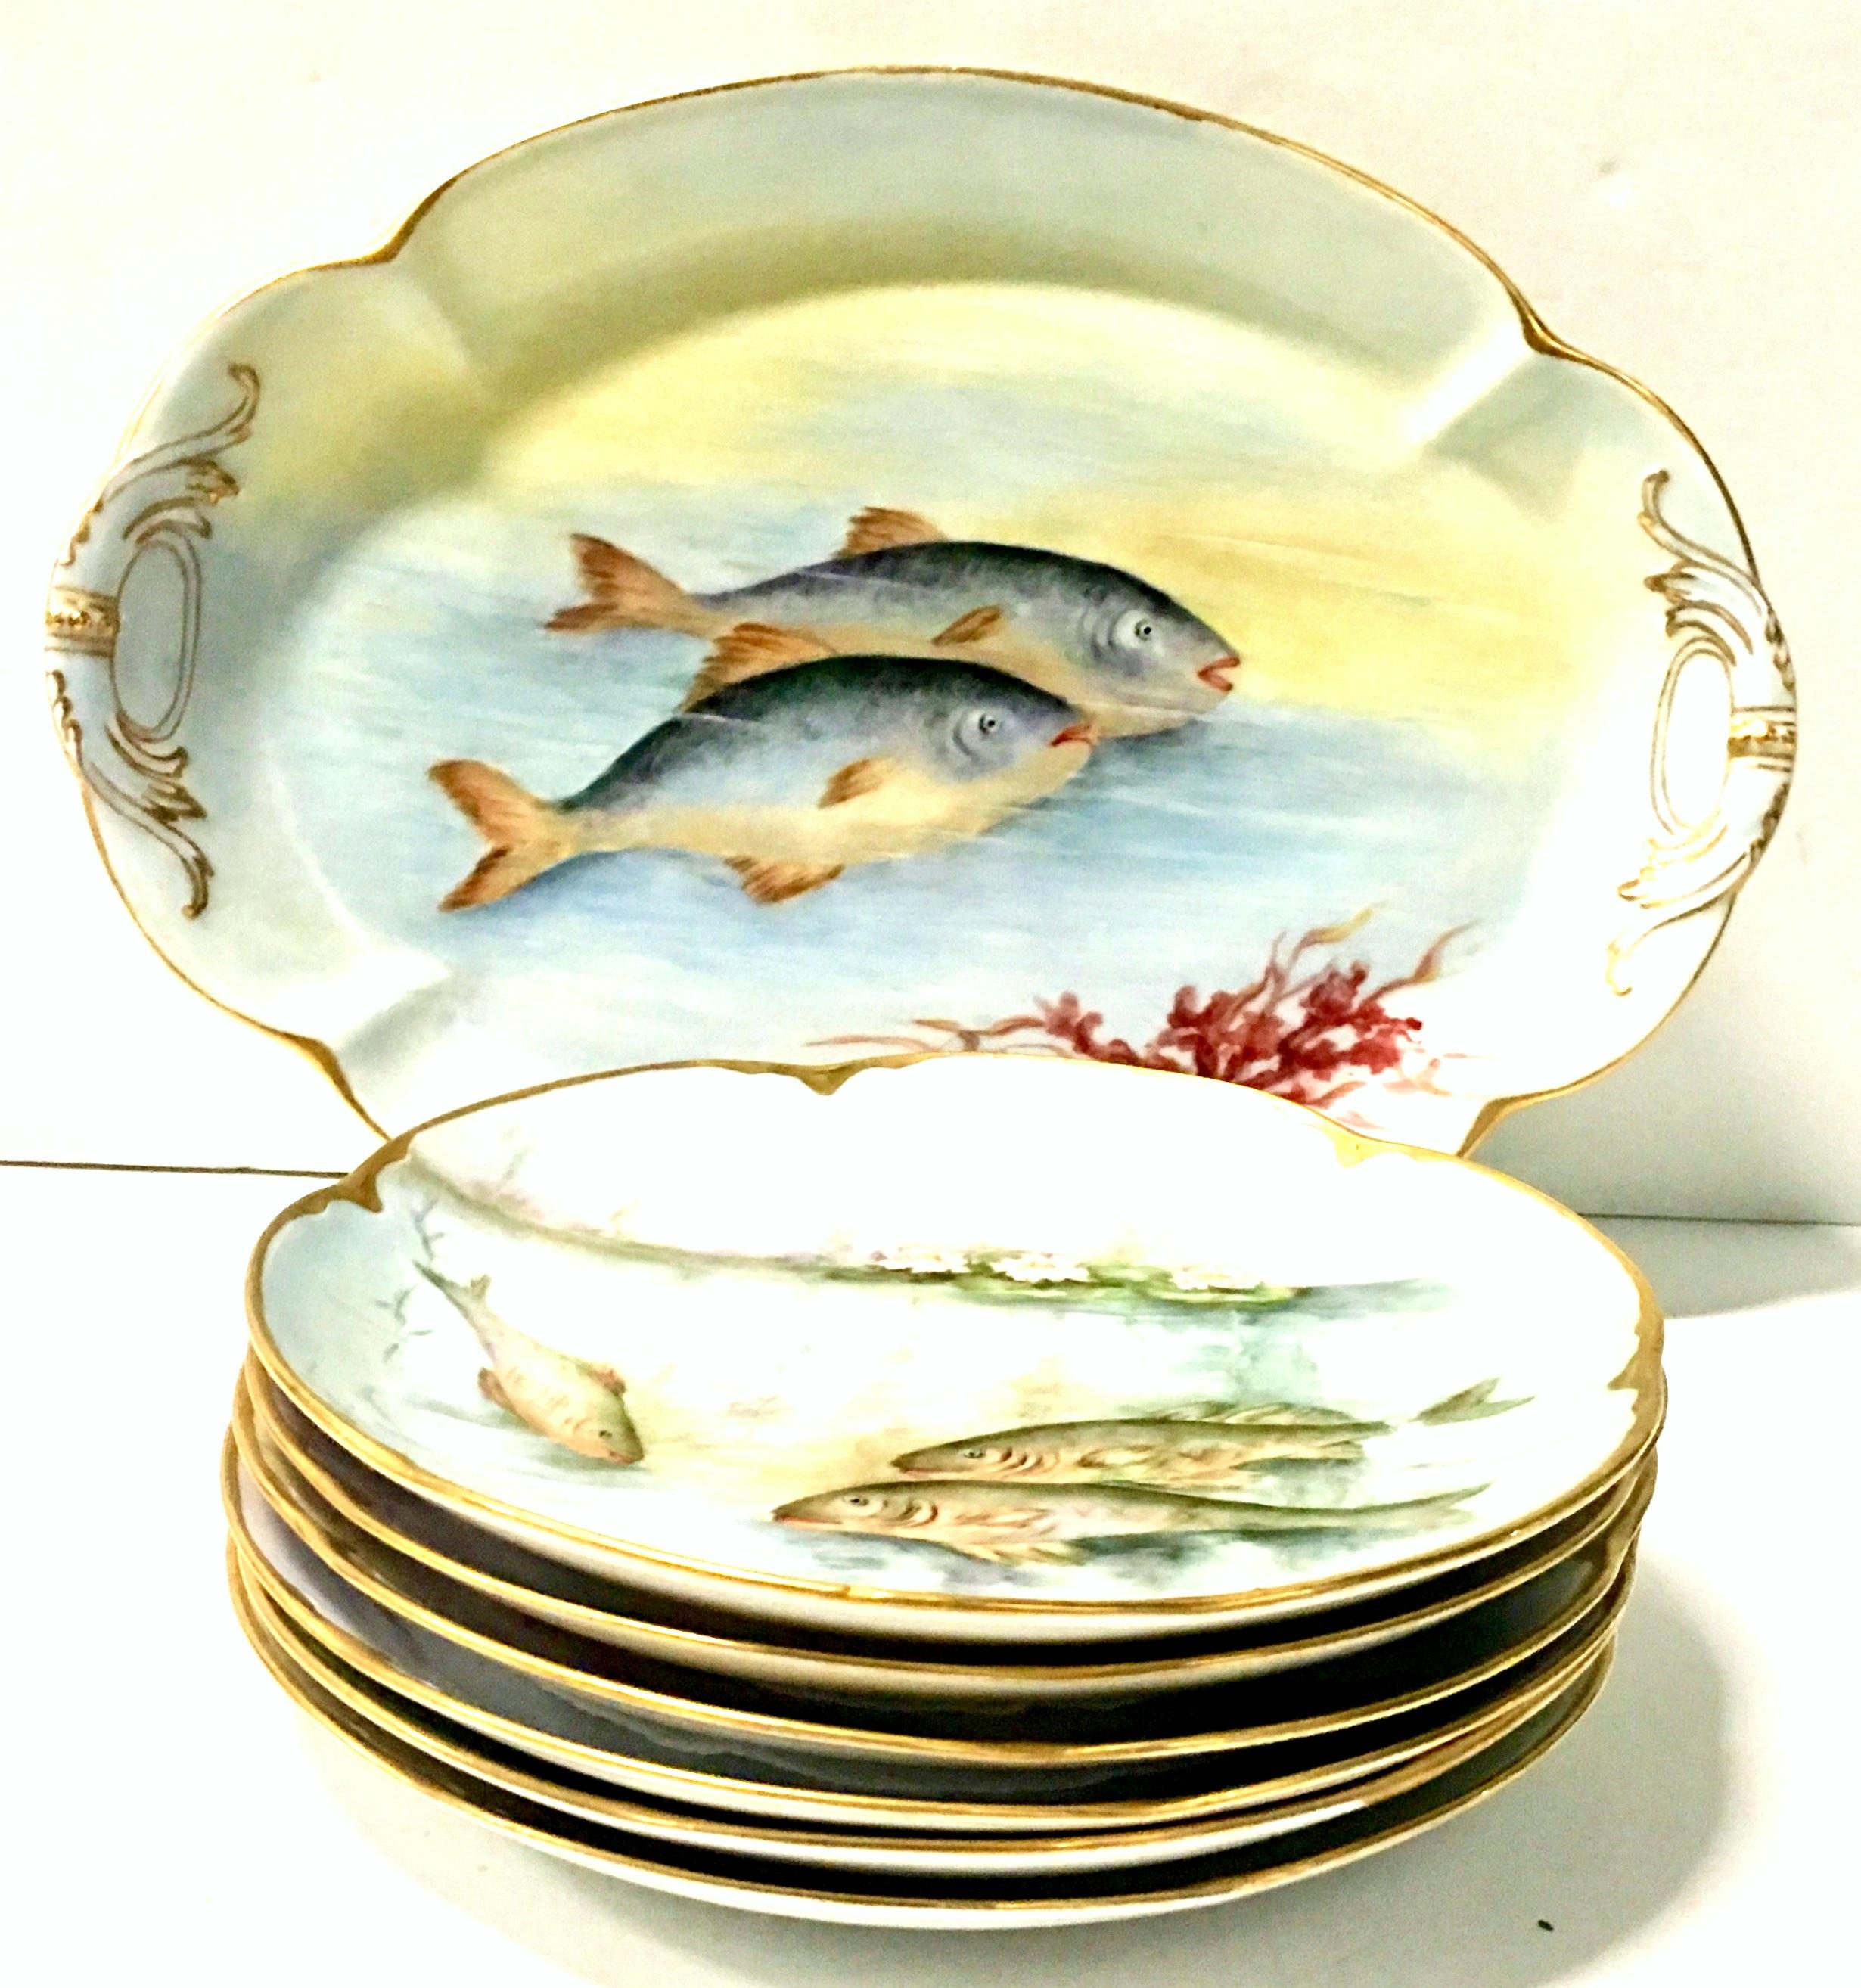 1890'S Victorian Havliand Limoge & JHR Bavaria porcelain and 22-karat gold hand-painted artist signed seven piece fish serving set. Stunning vibrant pastel hue set of seven fish serving porcelain plates and oval platter. Each piece depicts a